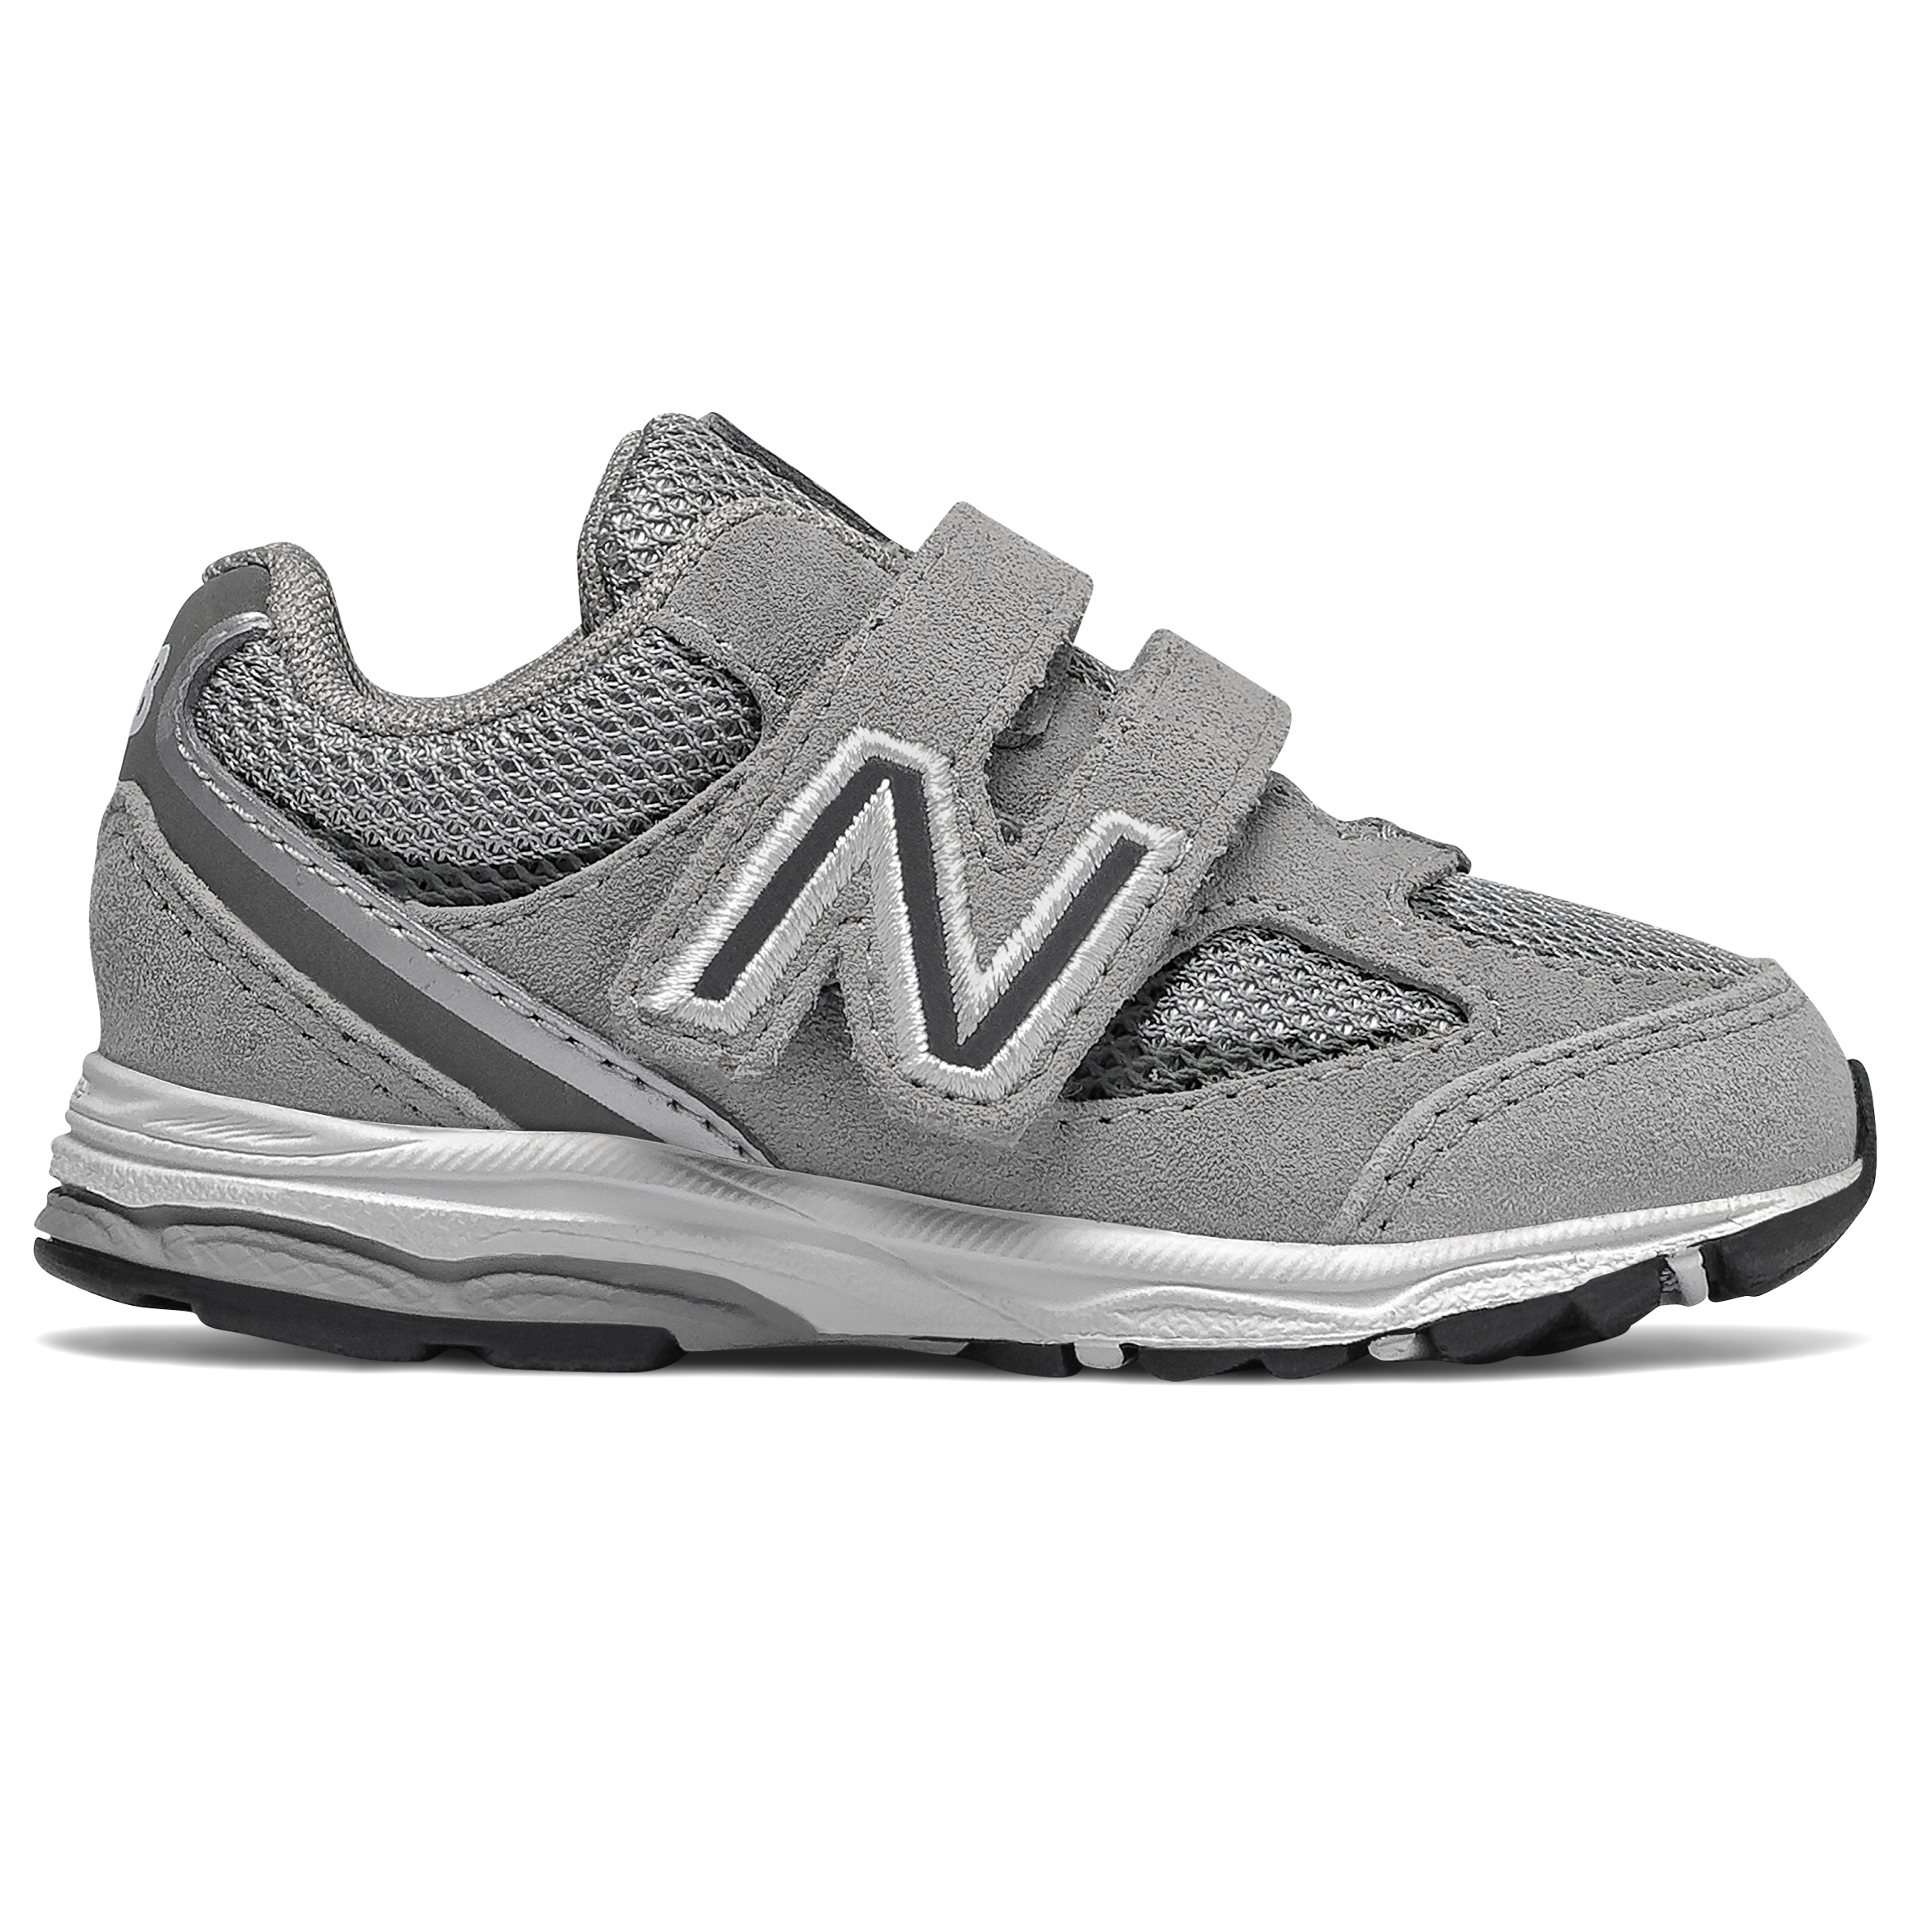 New Balance 77 V2 Online Store, UP TO 70% OFF